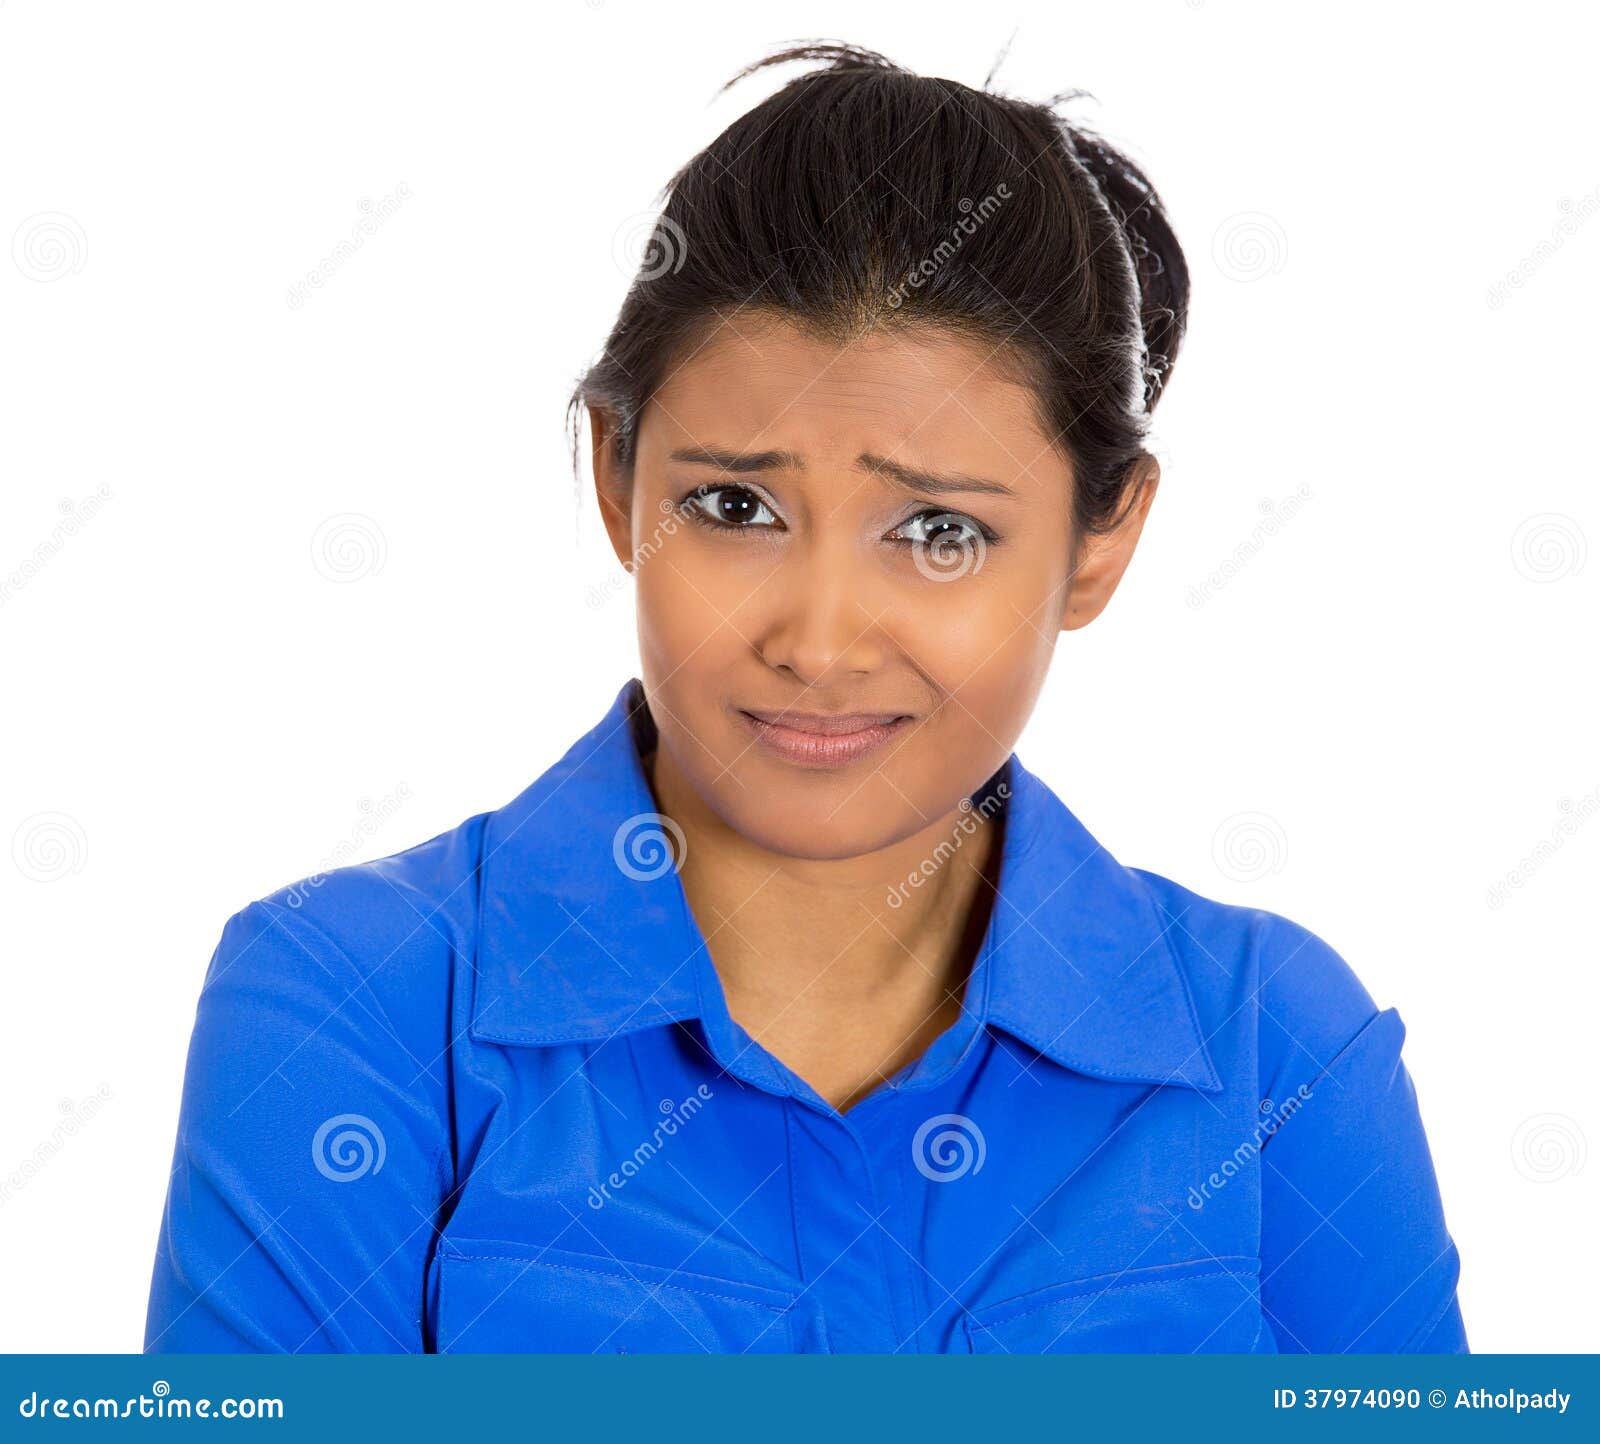 woman-looking-suspicious-closeup-portrait-skeptical-young-some-disgust-her-face-mixed-disapproval-isolated-37974090.jpg